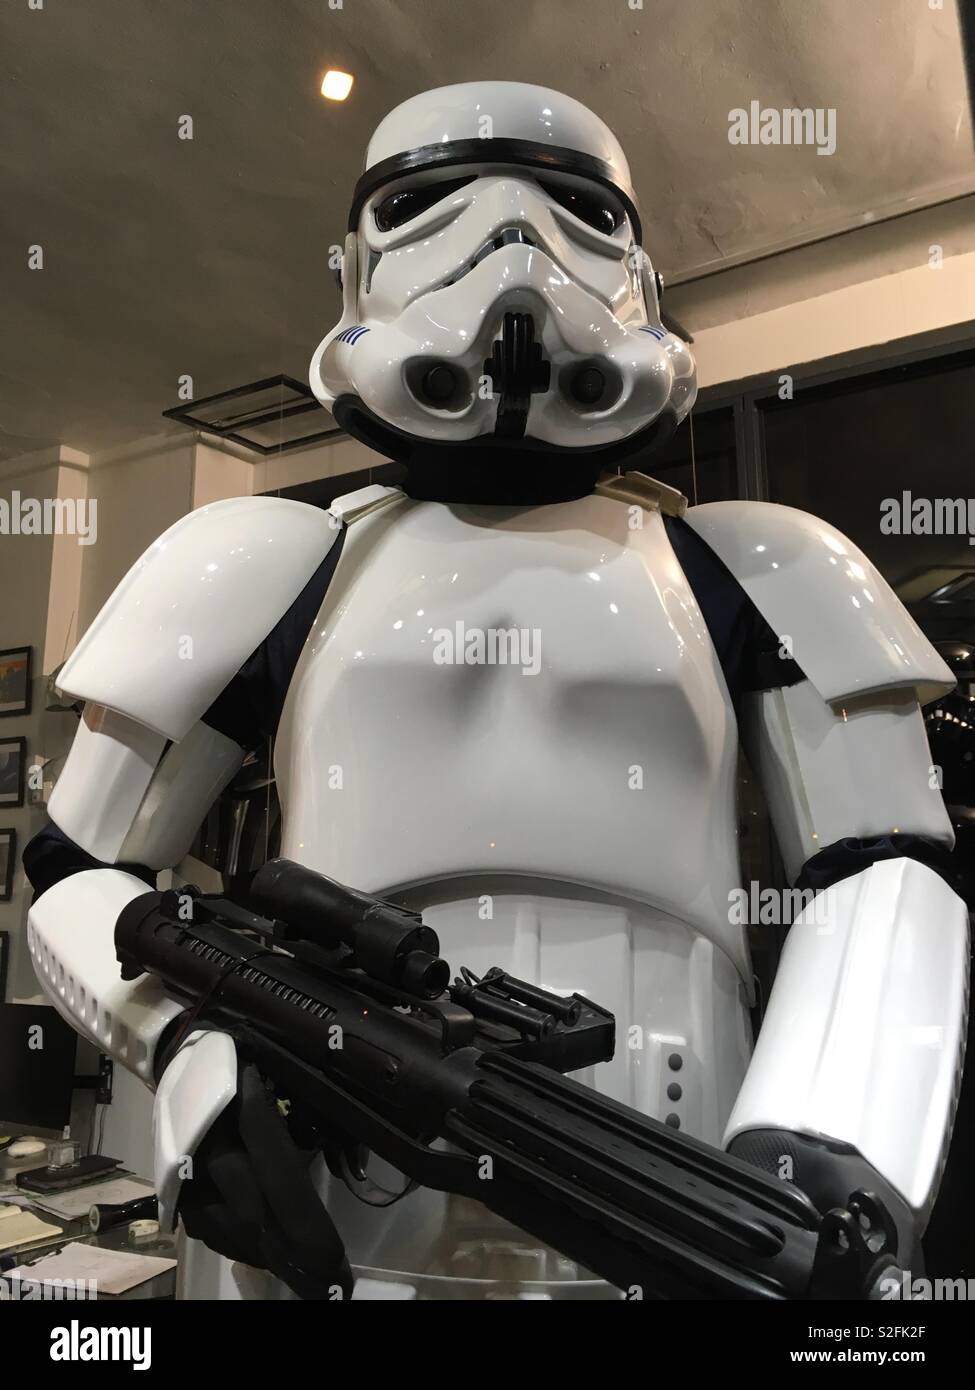 Star Wars storm trooper. Character from the Star Wars movie series in white armour shown in the window display at Shepperton design studios in Twickenham.England, UK Stock Photo